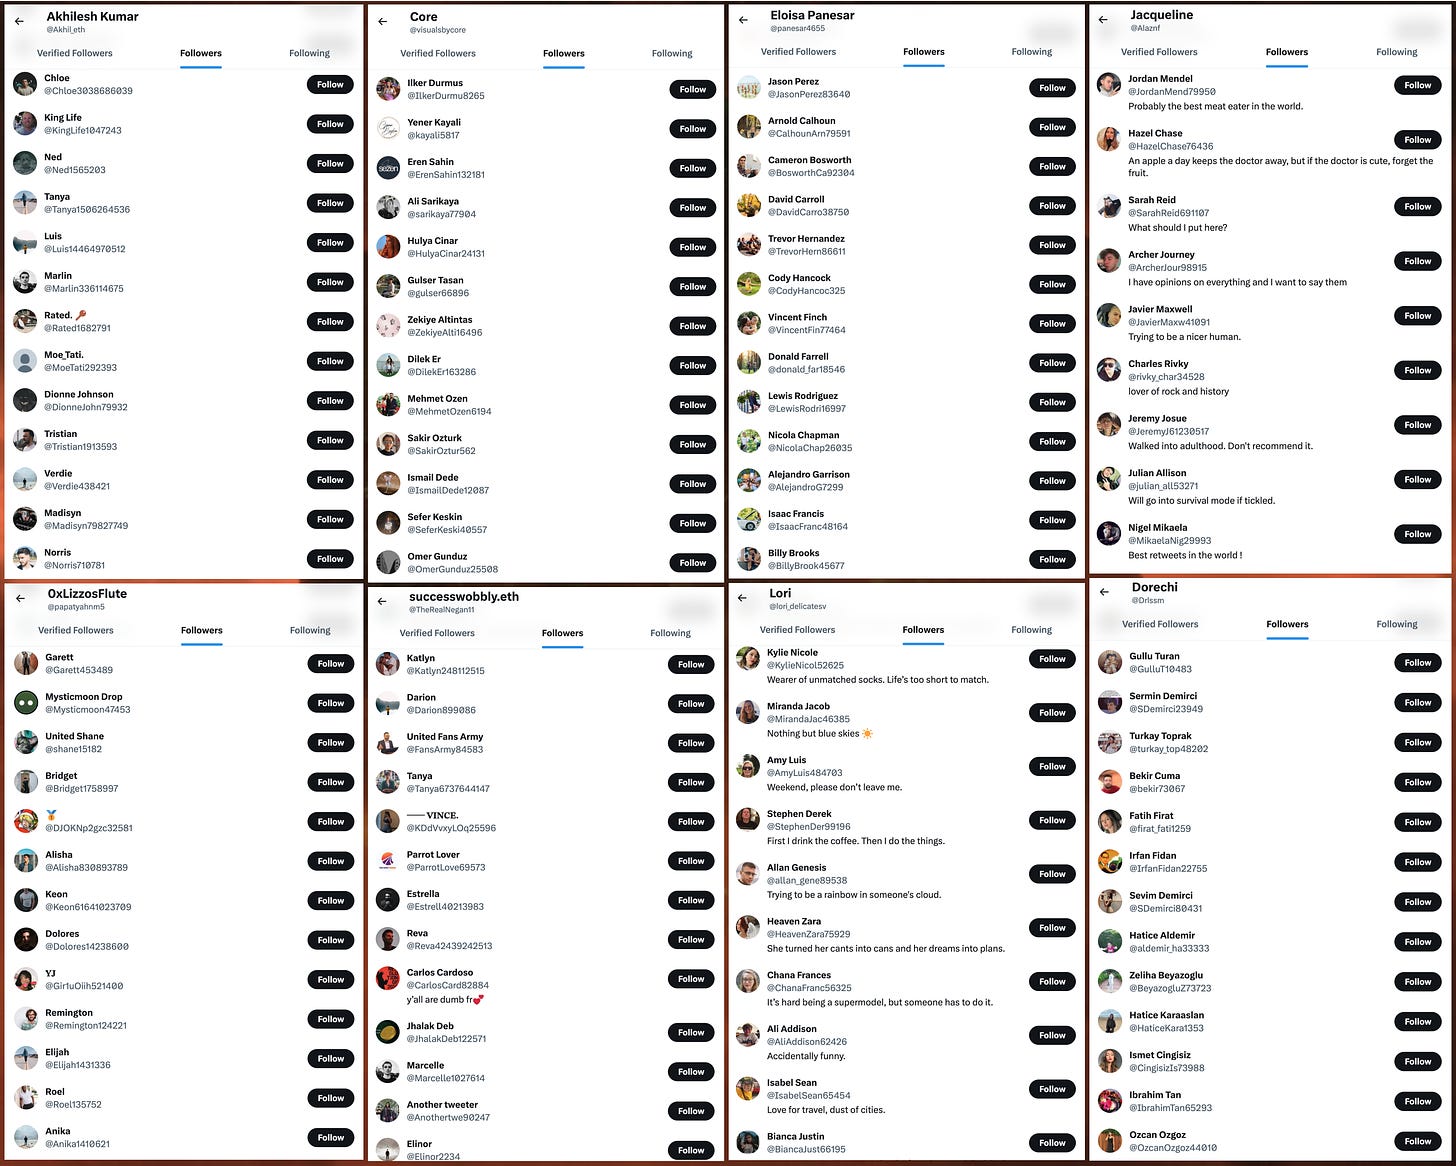 screenshots of the visible followers of some of the accounts that ran crypto spam ads